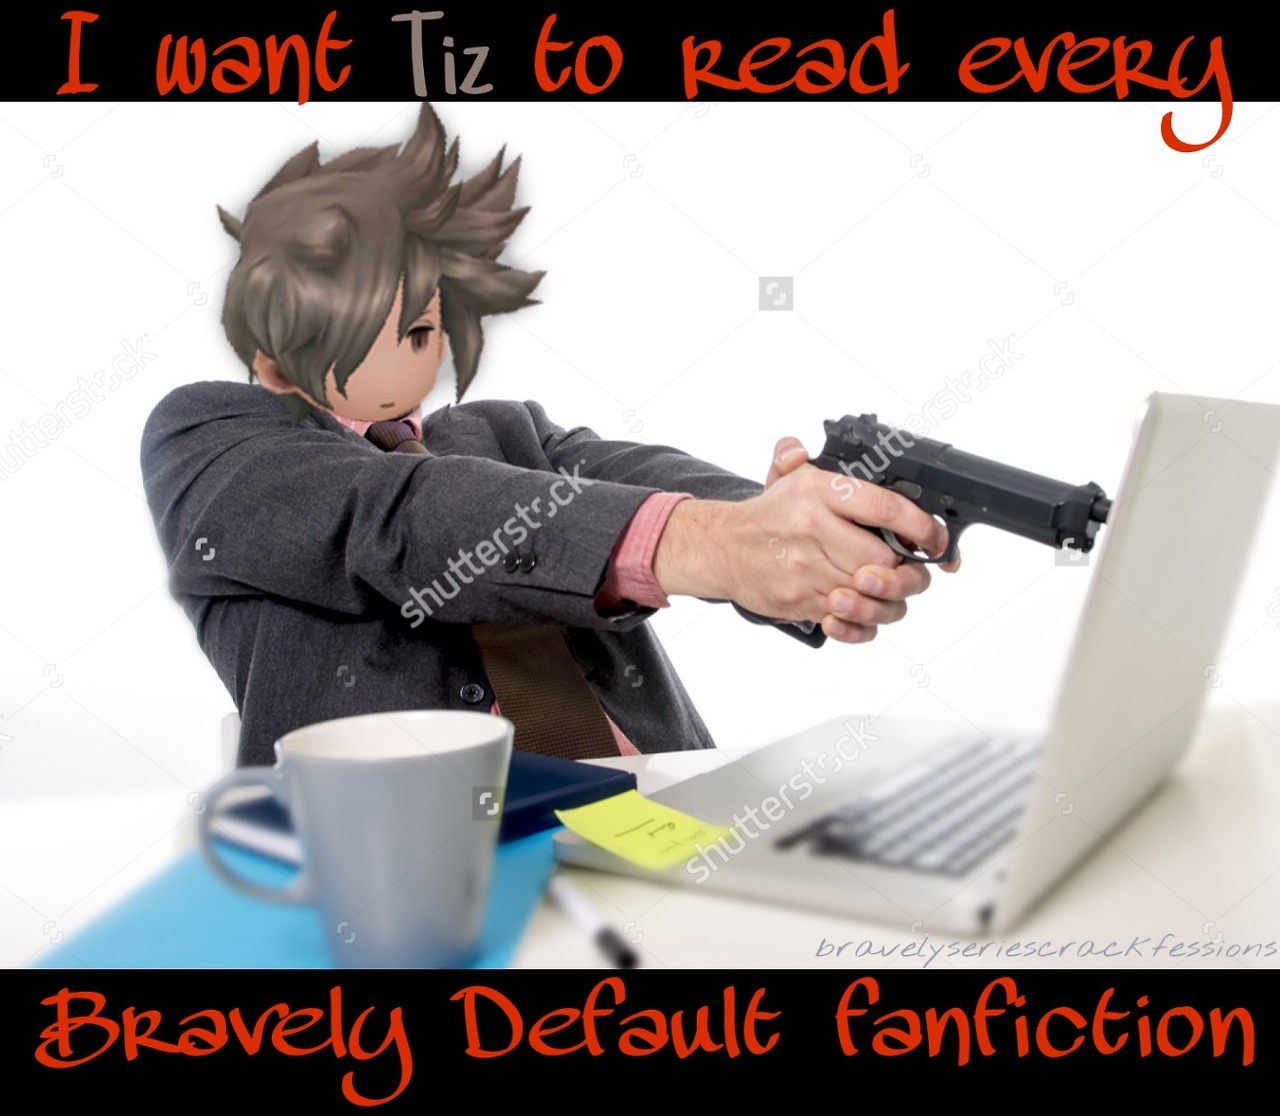 bravelyseriescrackfessions:  Anonymous: I want Tiz to read every Bravely Default